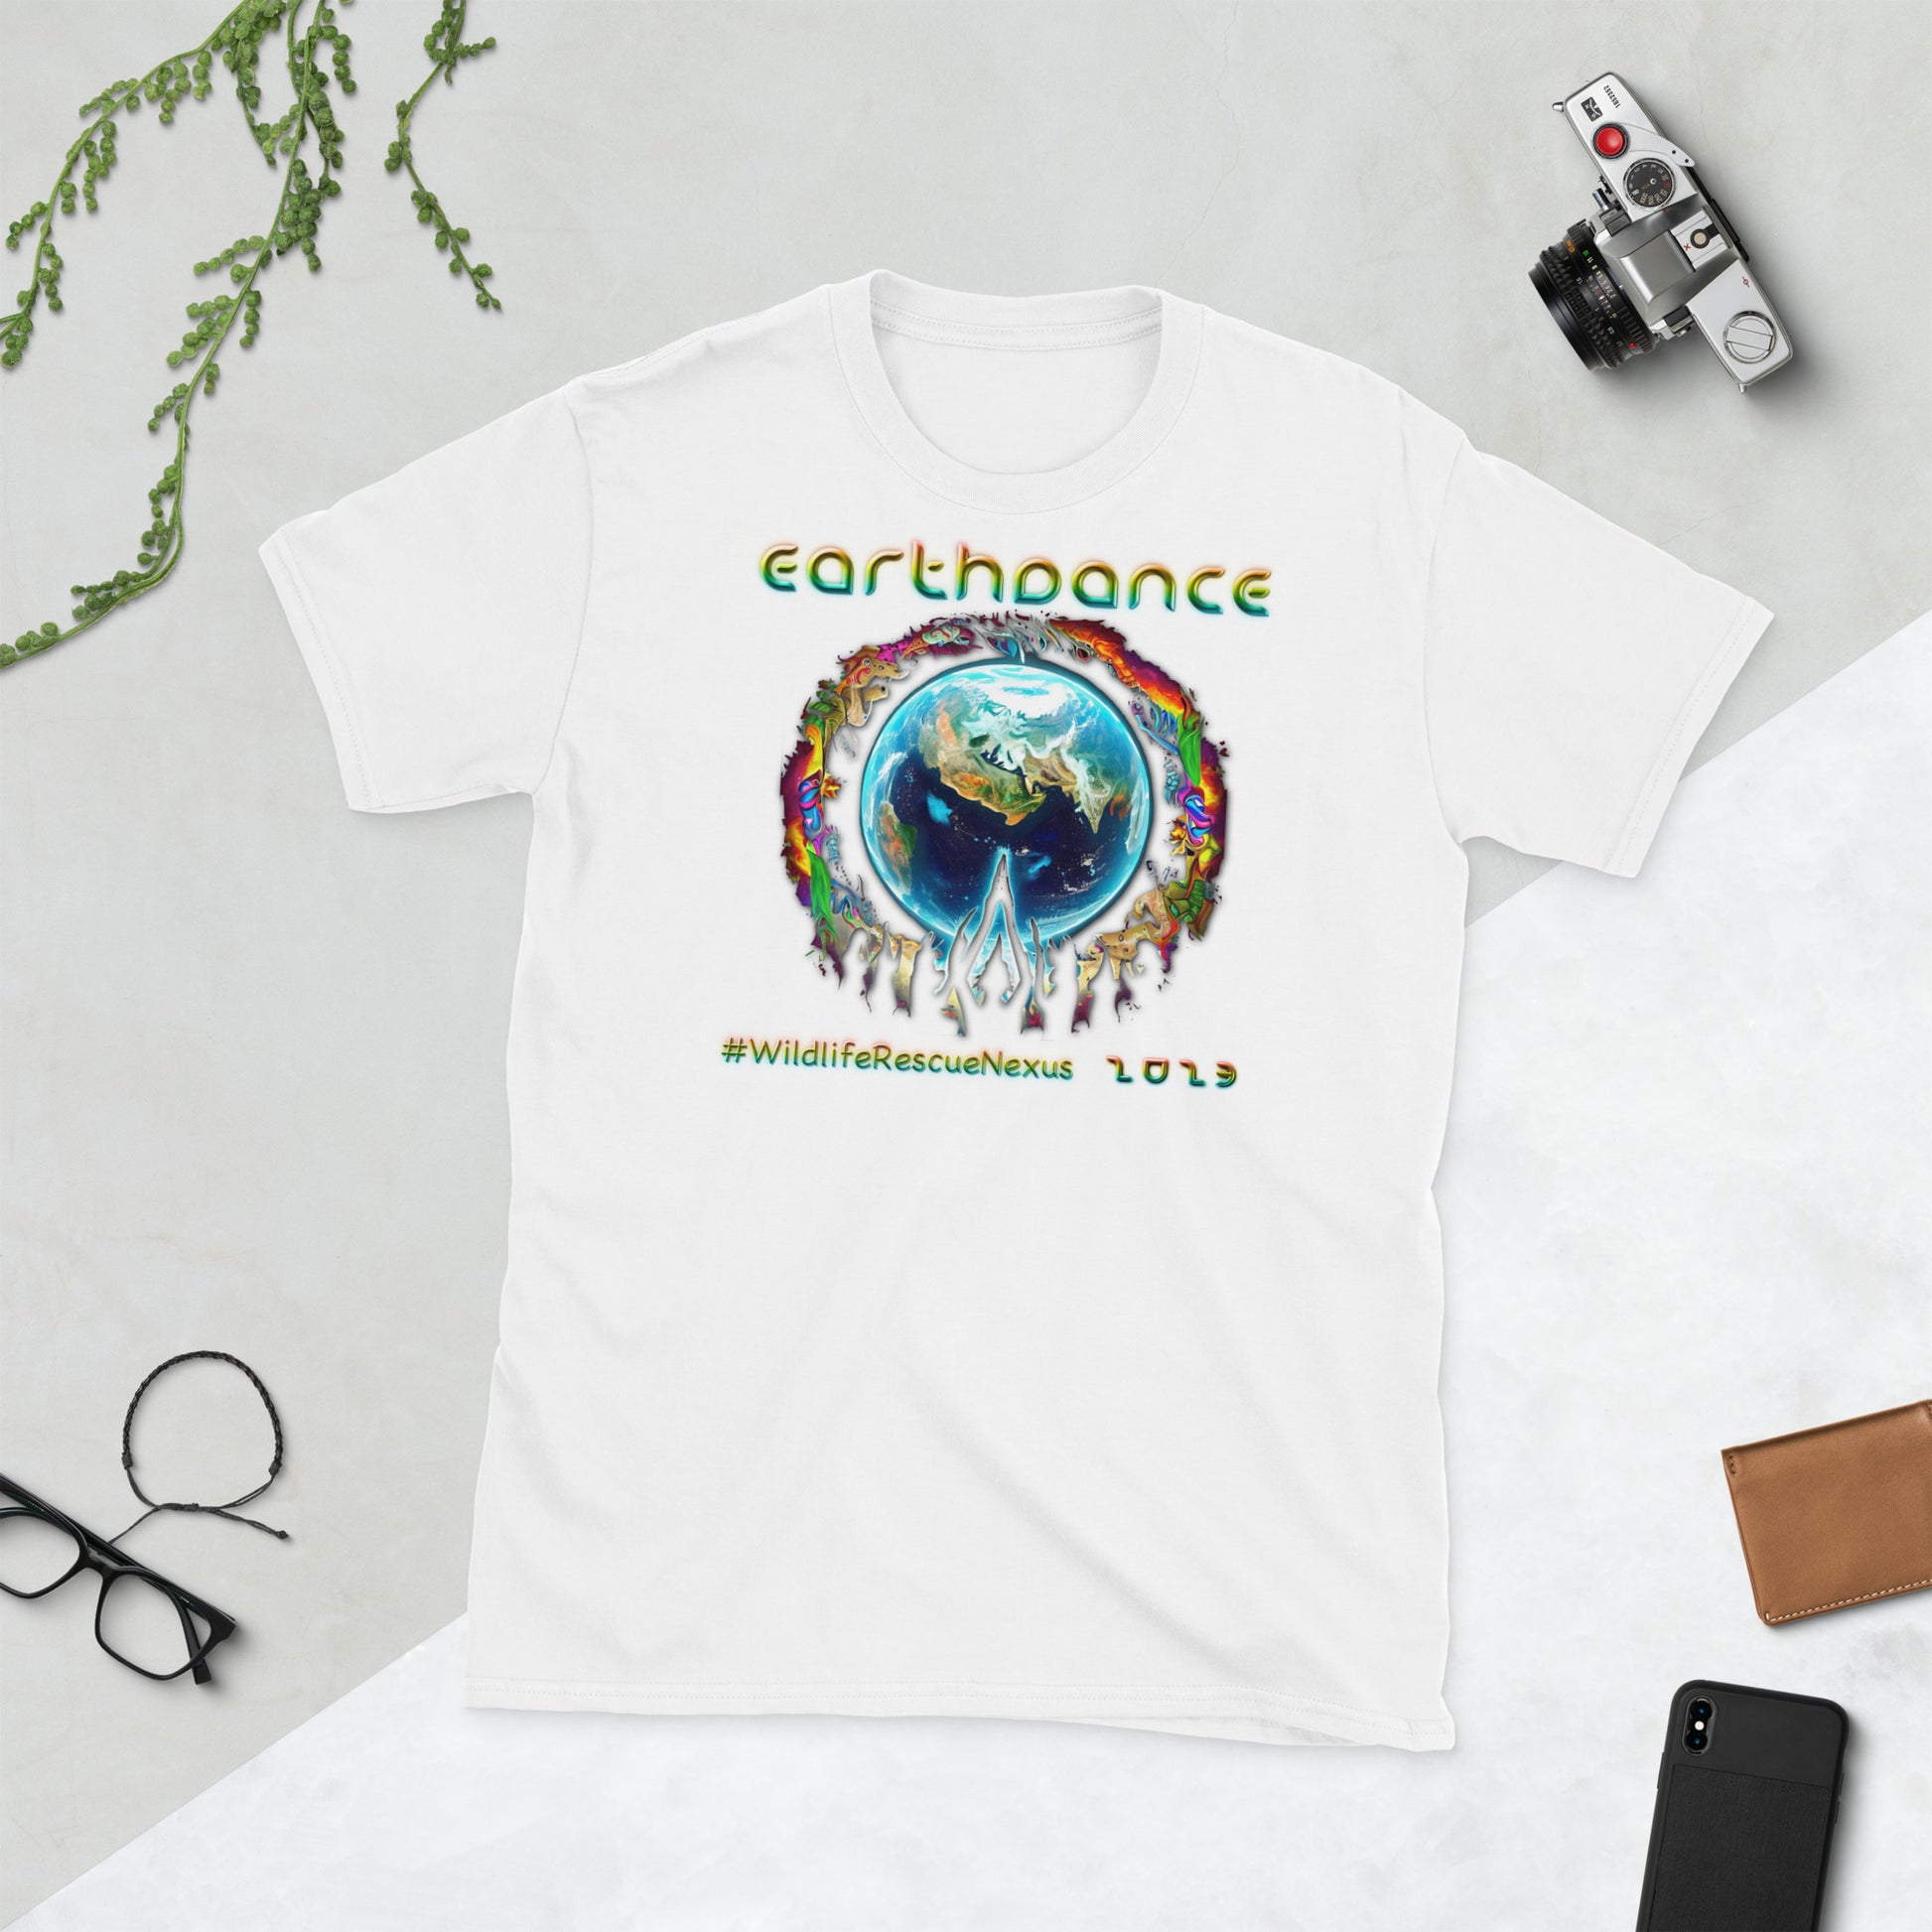 Earthdance 2023 - P.A.C. v1 - Limited Edition - Short-Sleeve Unisex T-Shirt - The Foundation of Families